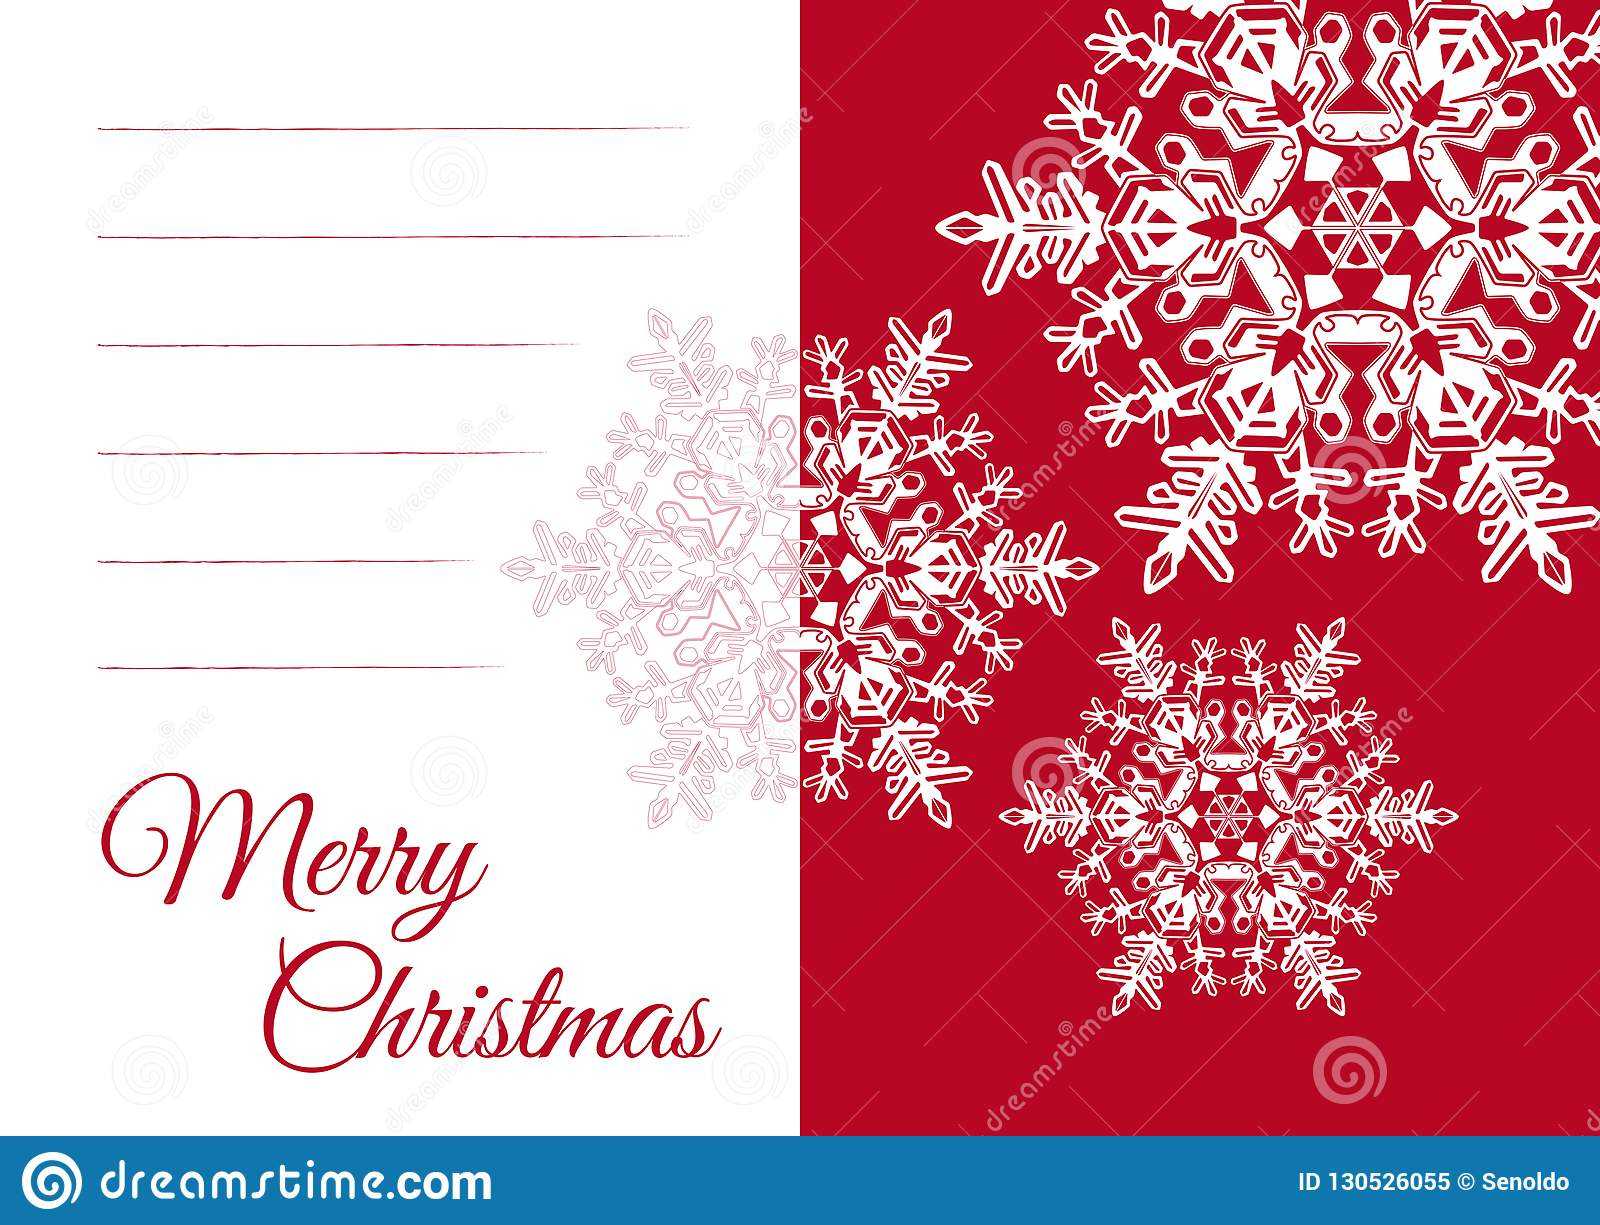 Christmas Greeting Card Template With Blank Text Field Stock In Blank Christmas Card Templates Free